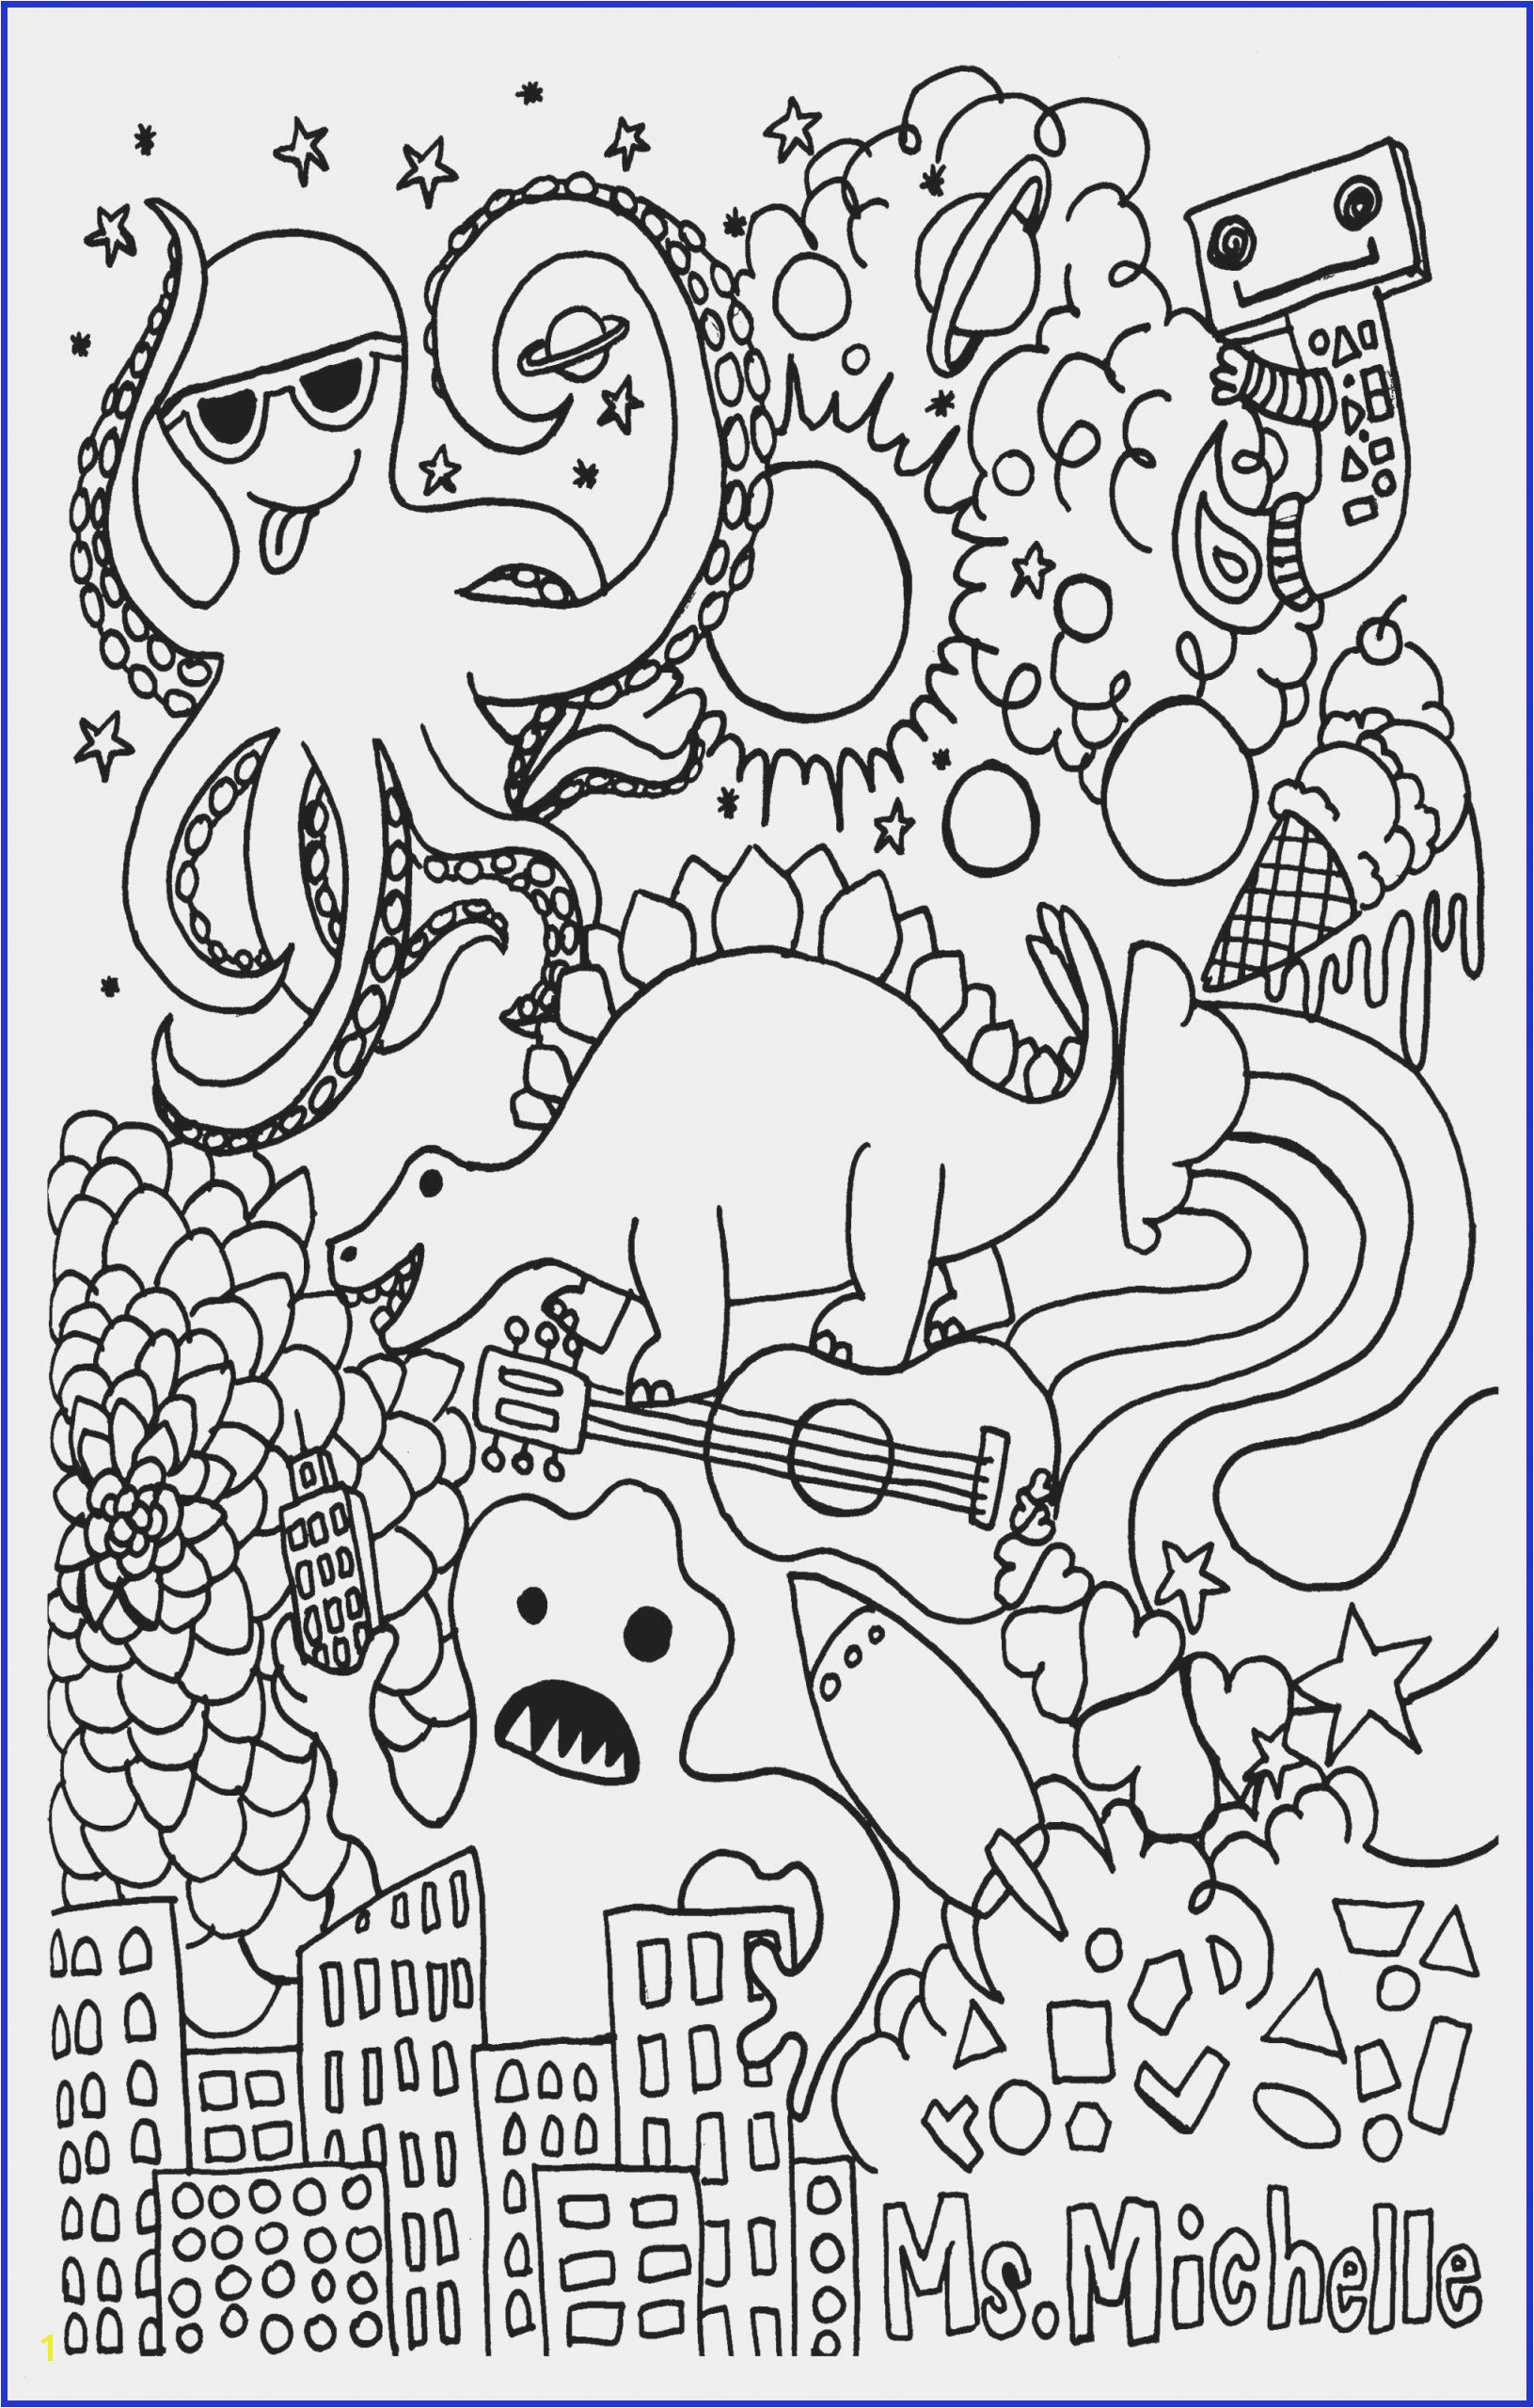 Coloring Pages for Valentines Day Awesome Free Printable Valentines Coloring Pages Reccoloring